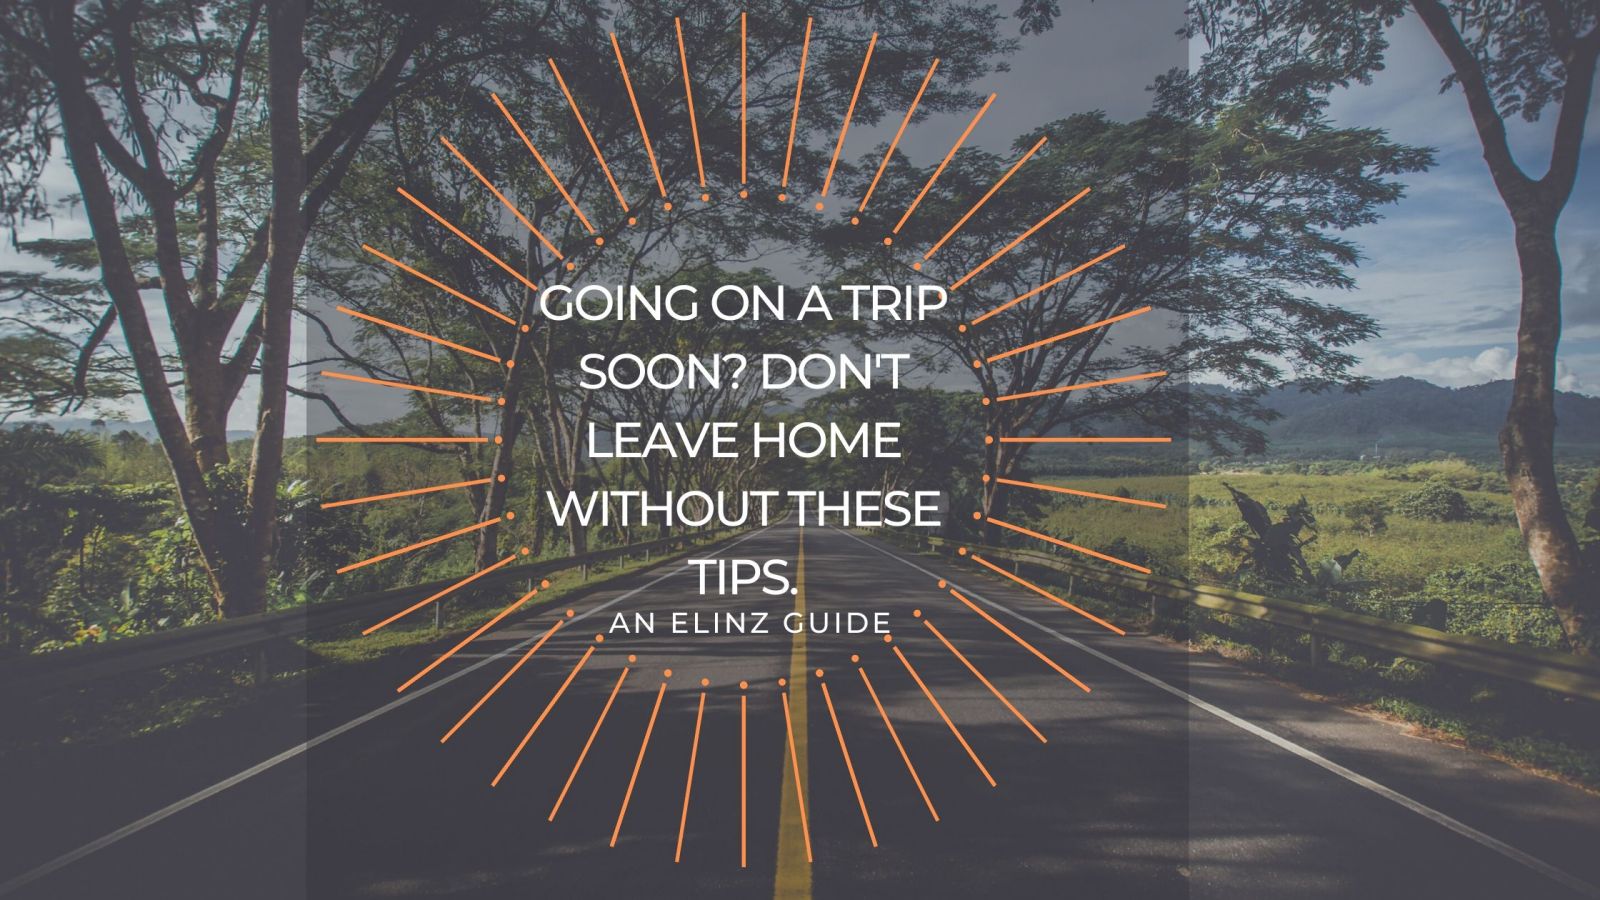 don't leave home without these tips covid-19 safety blog banner